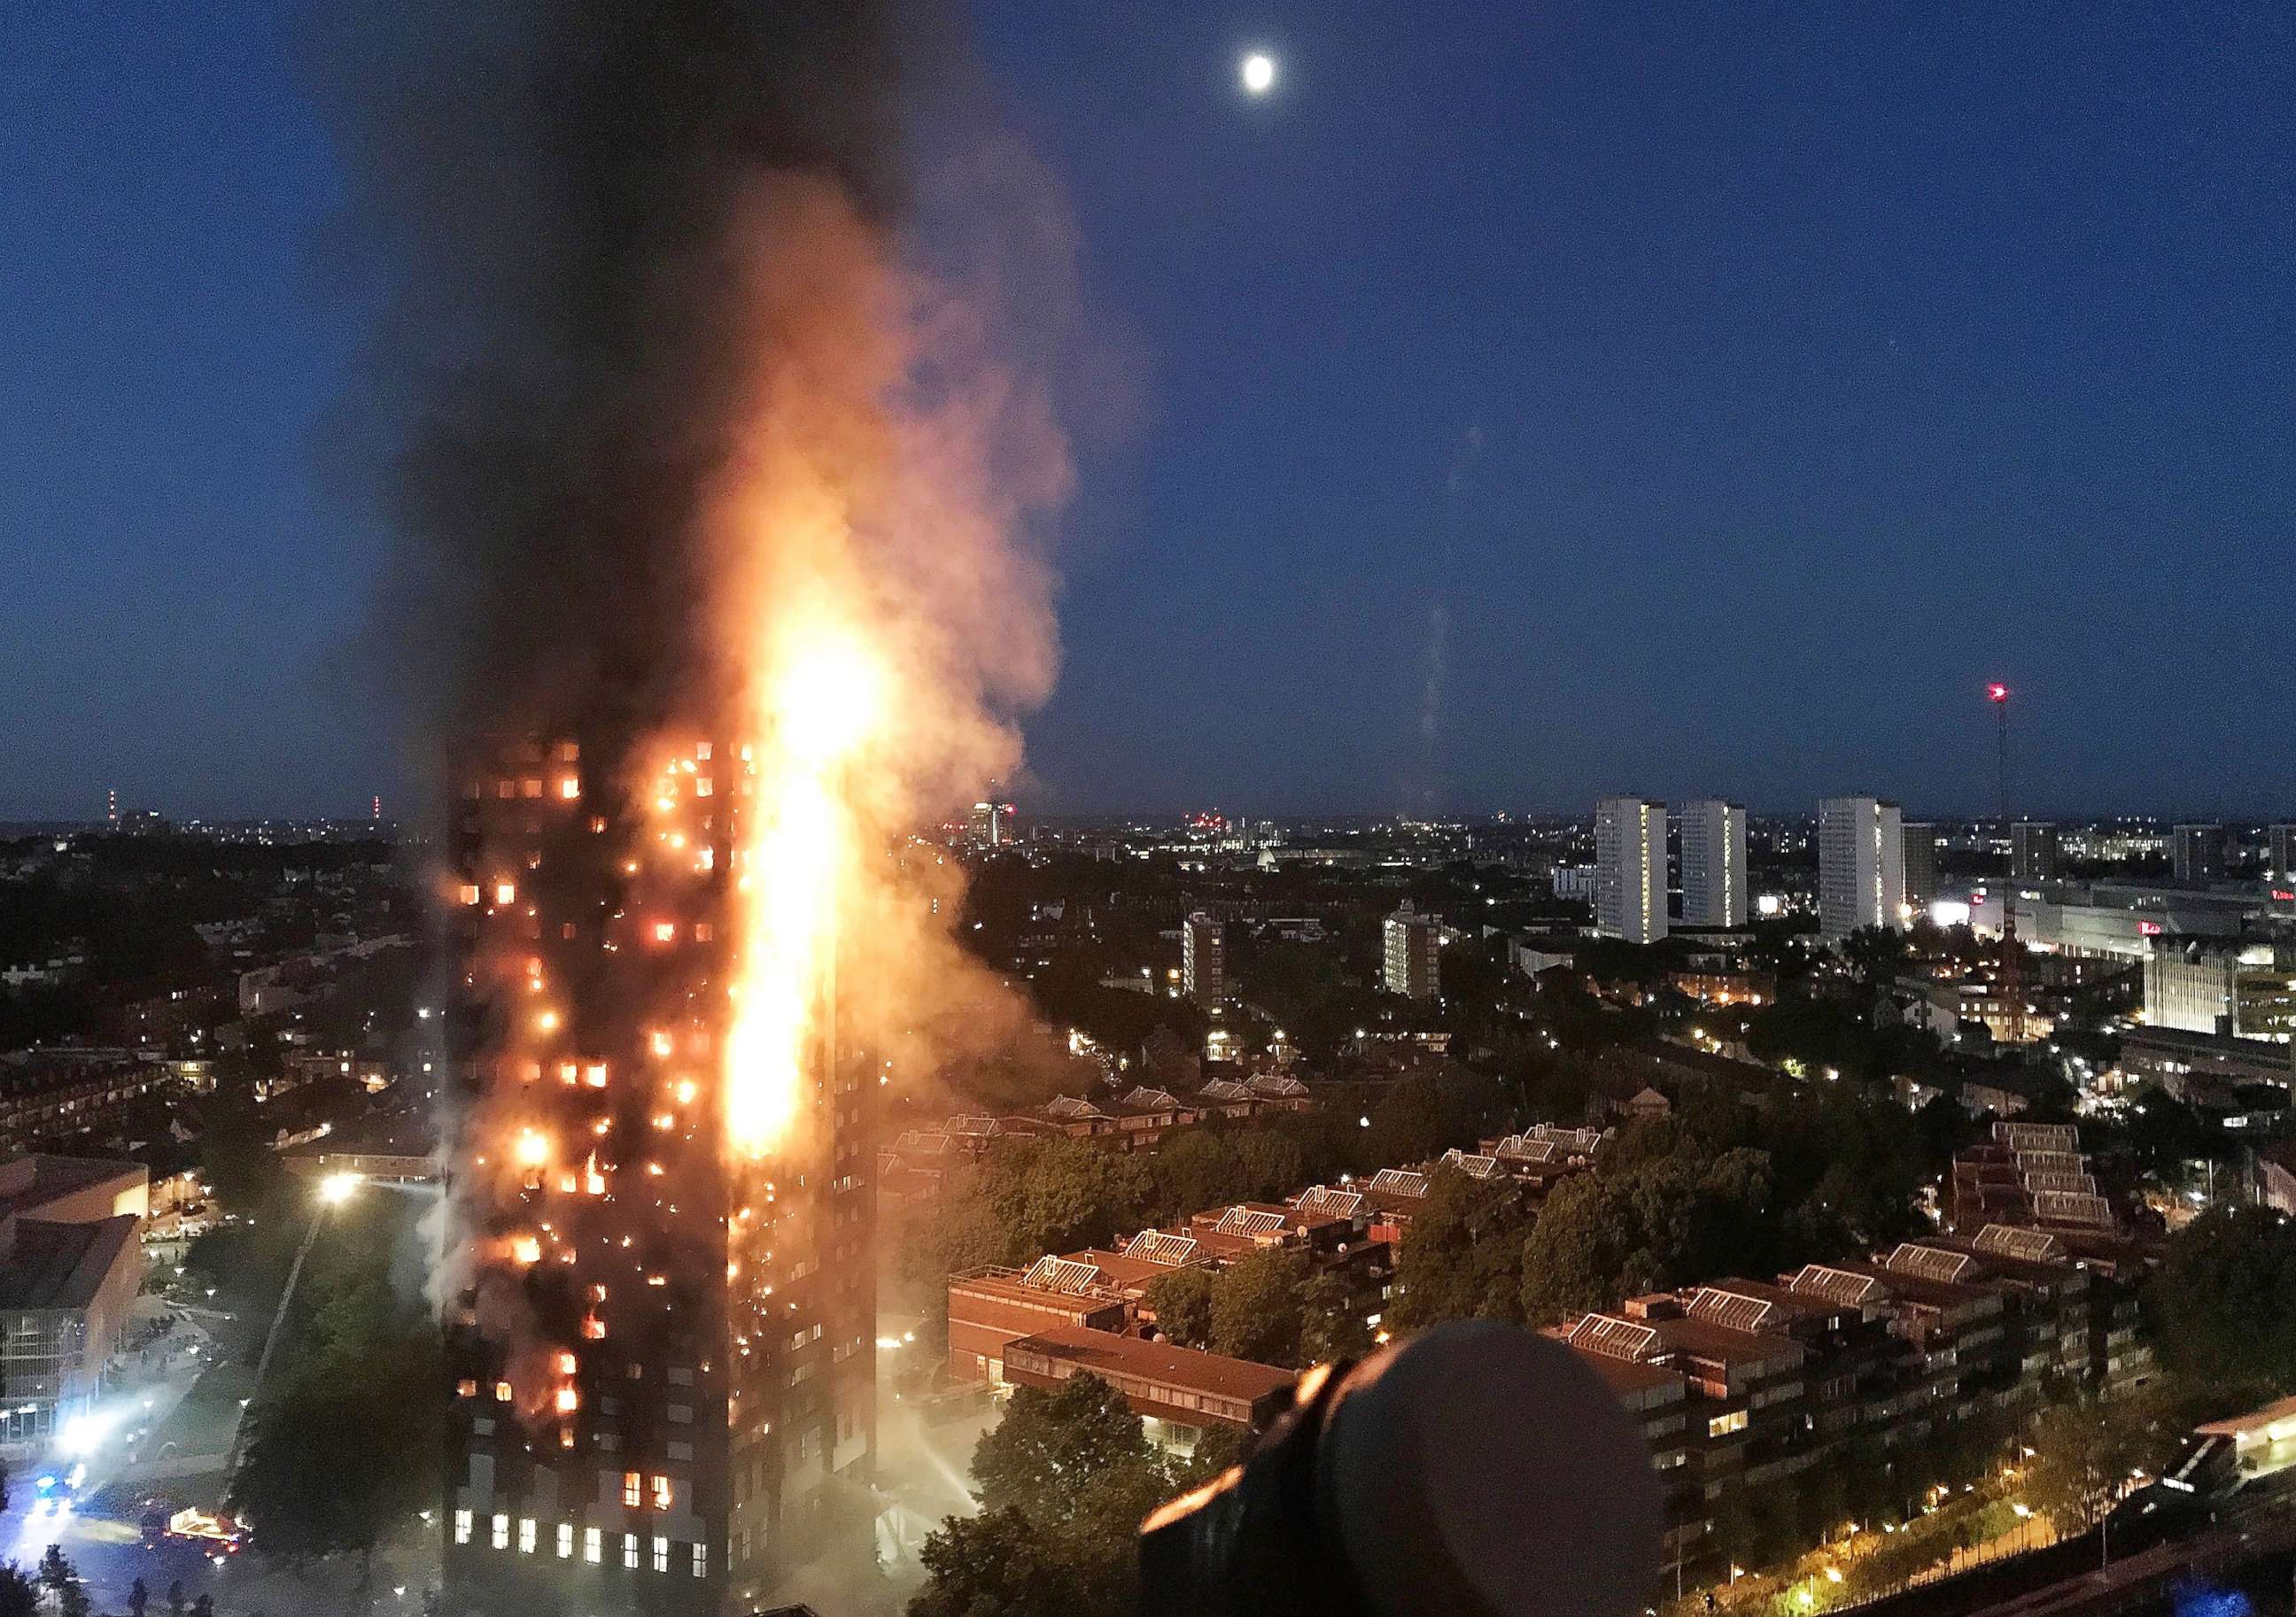 PHOTO: A huge fire engulfs the 24 story Grenfell Tower in Latimer Road, West London in the early hours of this morning on June 14, 2017 in London.